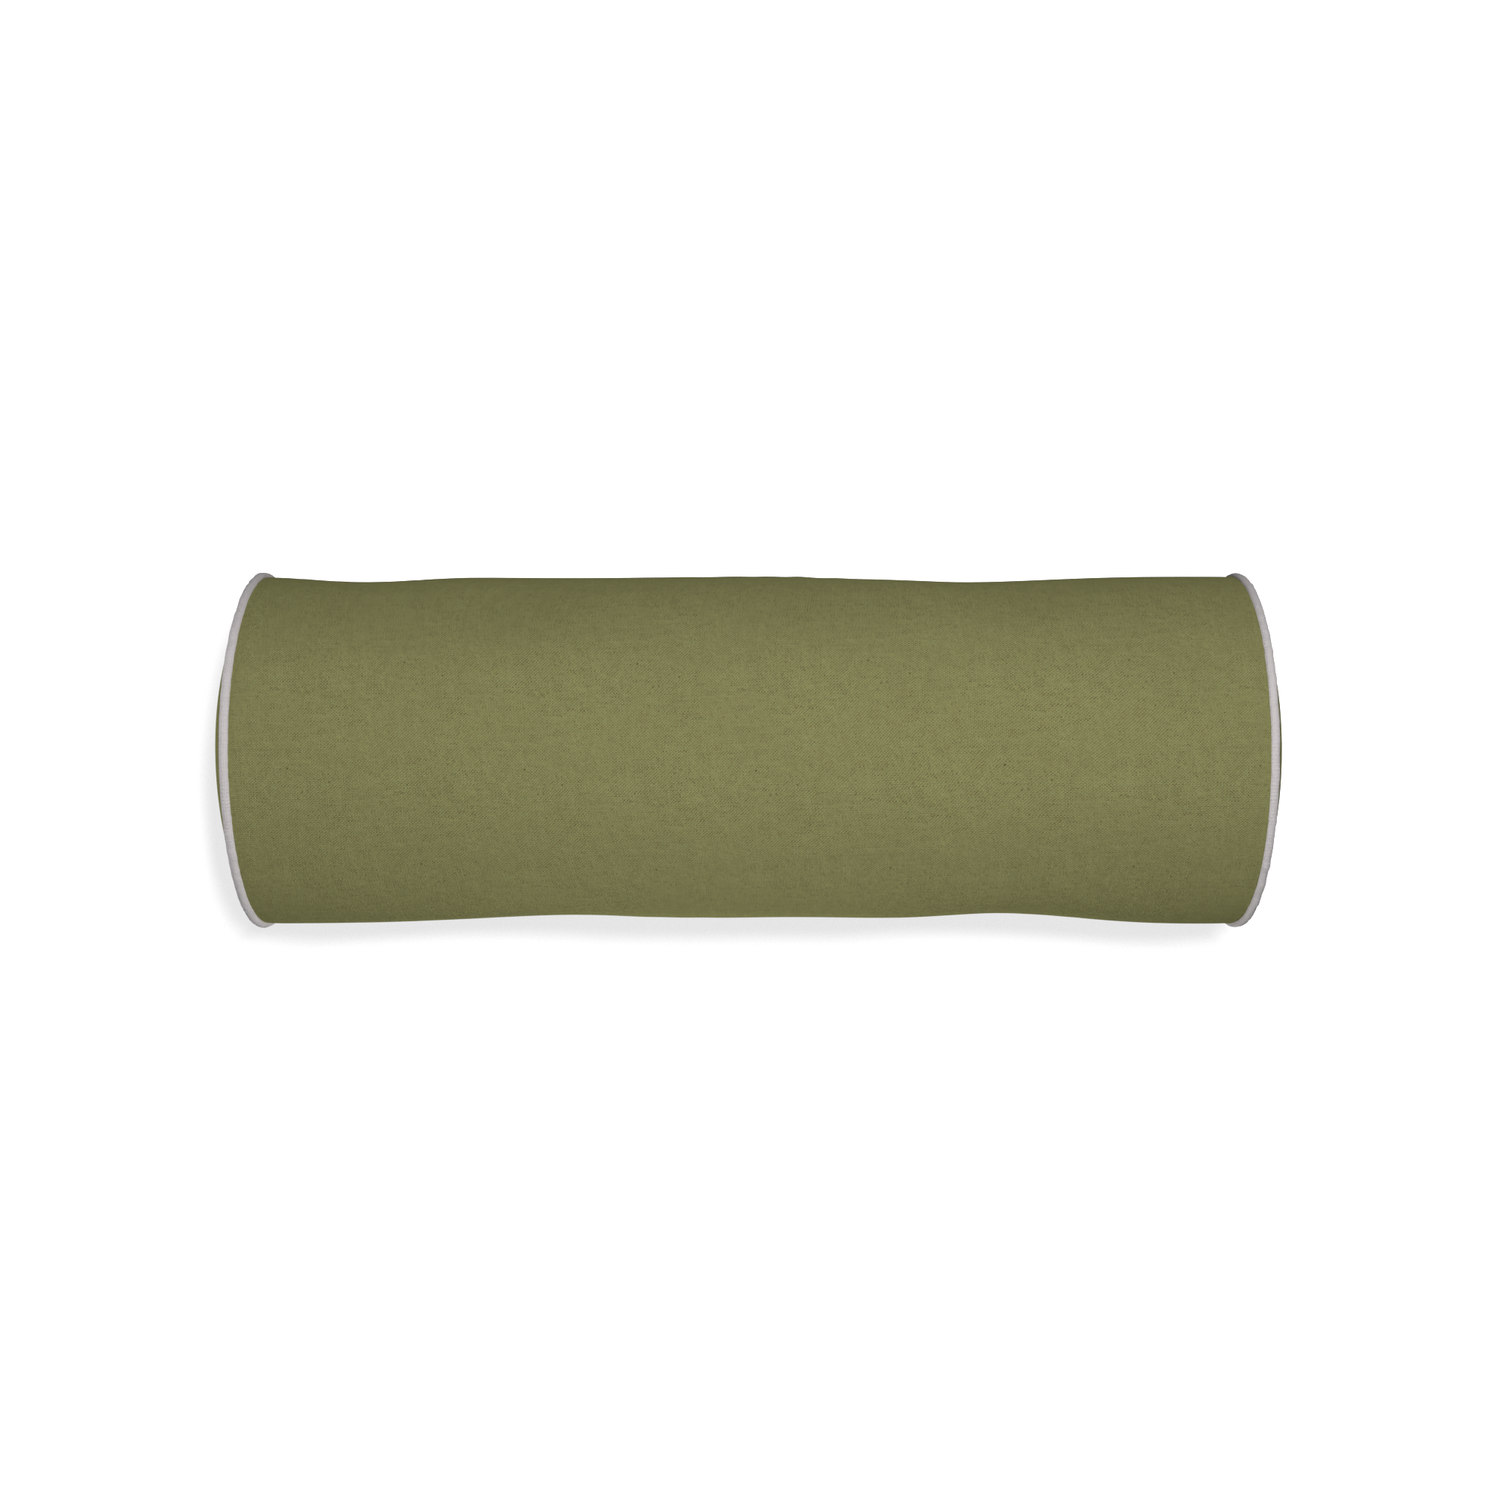 Bolster moss custom moss greenpillow with pebble piping on white background